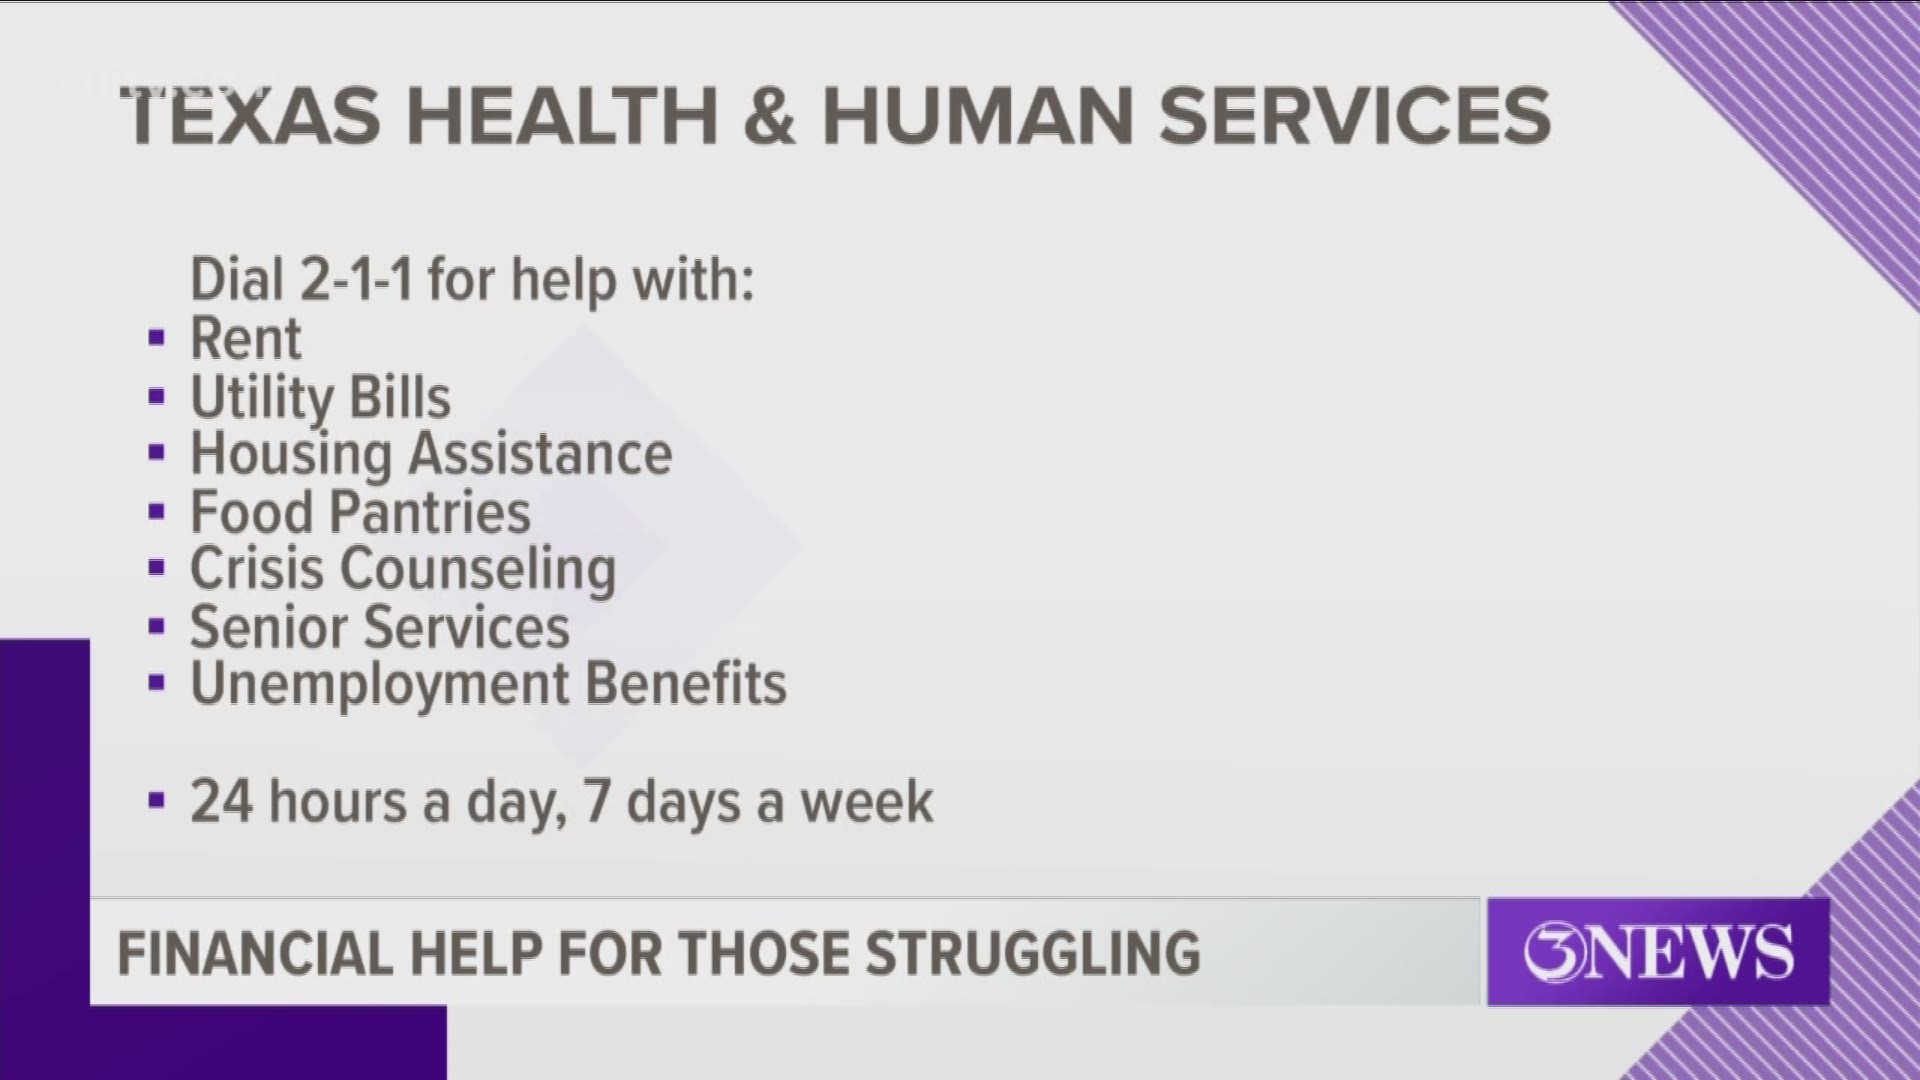 Several organizations are willing to help anyone struggling financially at this time.